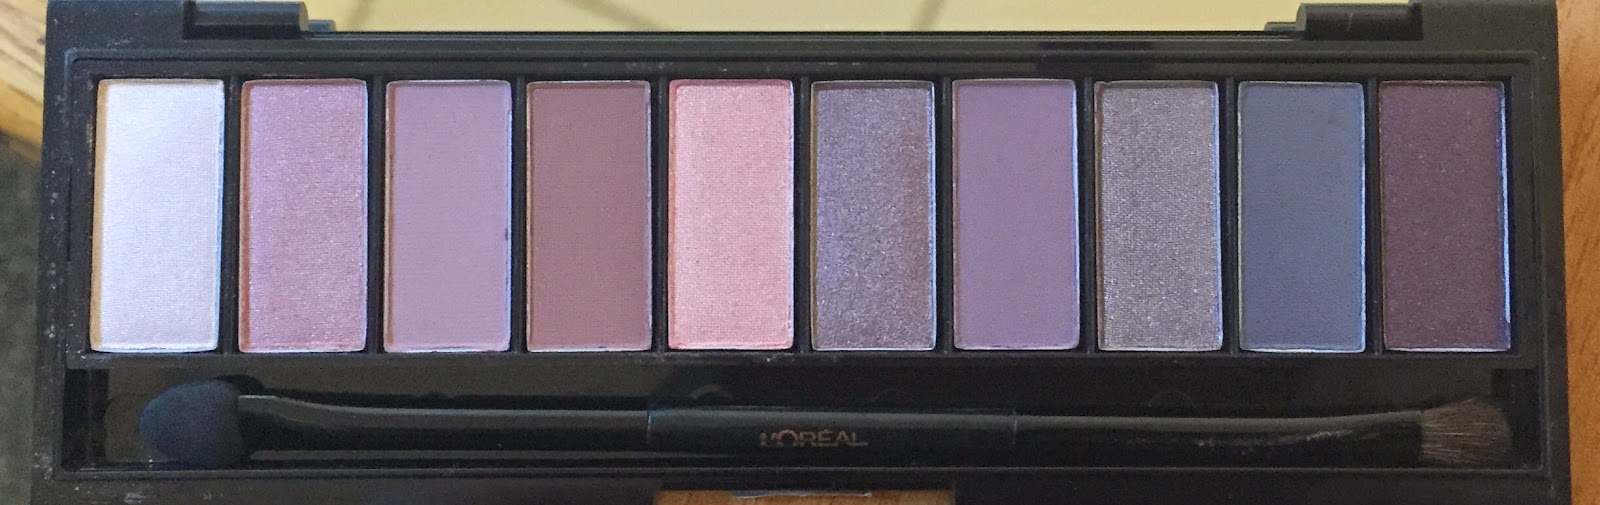 Loreal La Palette Nude 1 Review Swatches